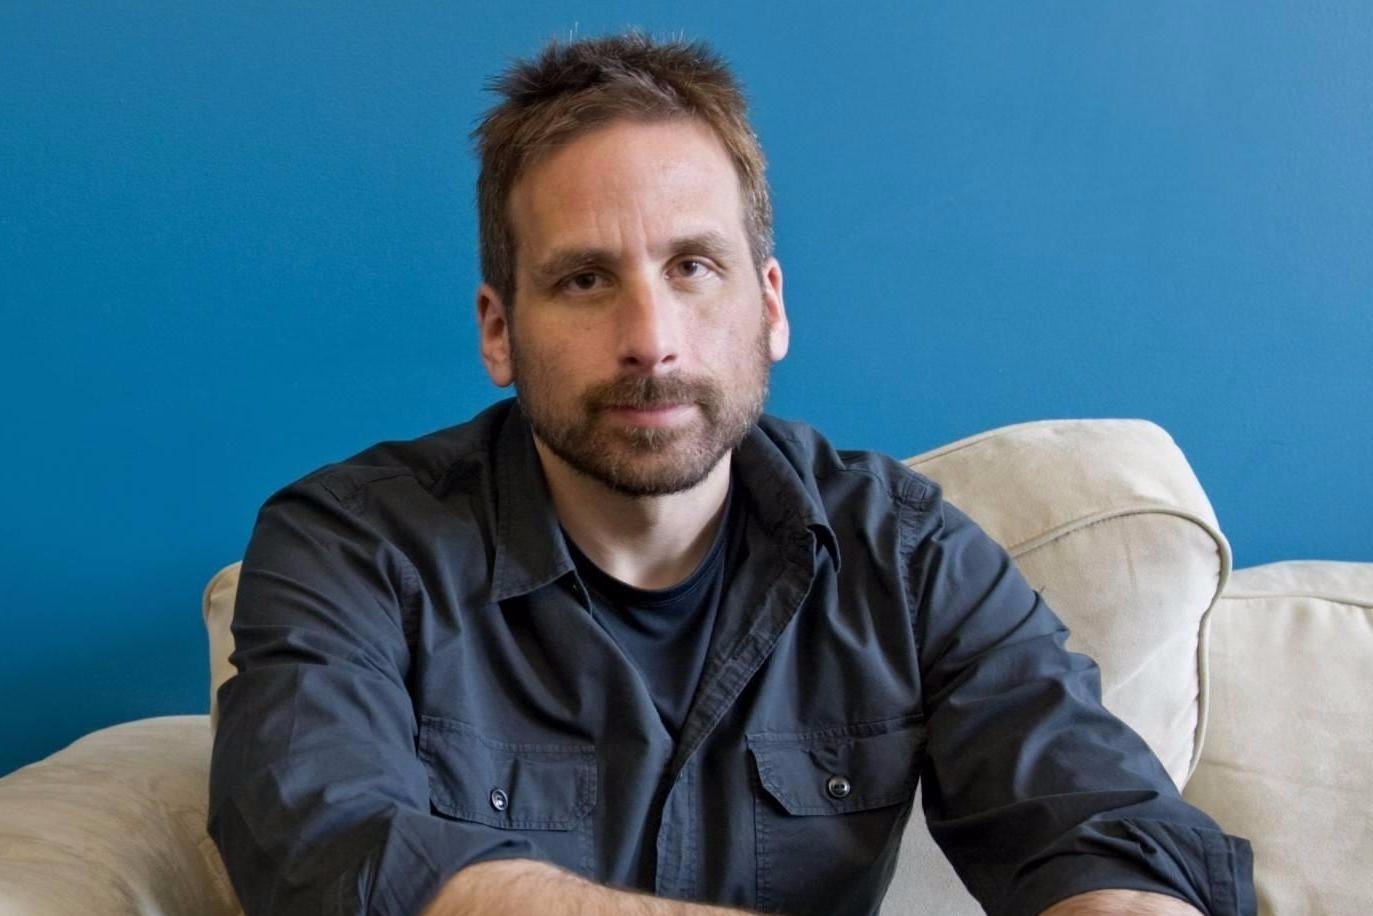 Image for Ken Levine's next game will be "more challenging" than BioShock